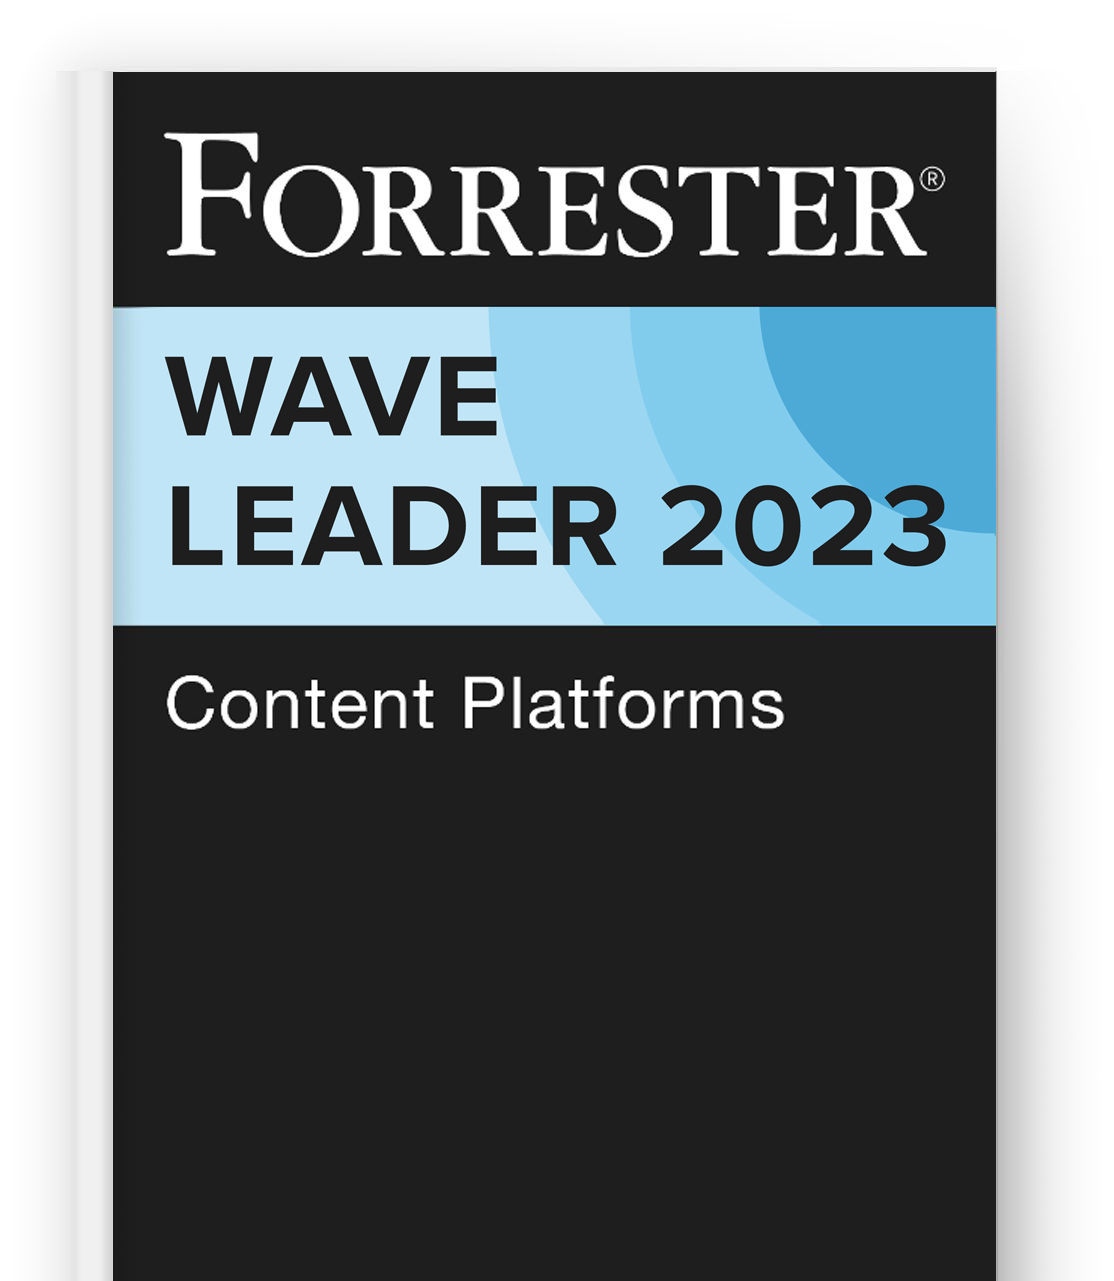 The Forrester Wave™: Content Platforms, Q1 2023 report